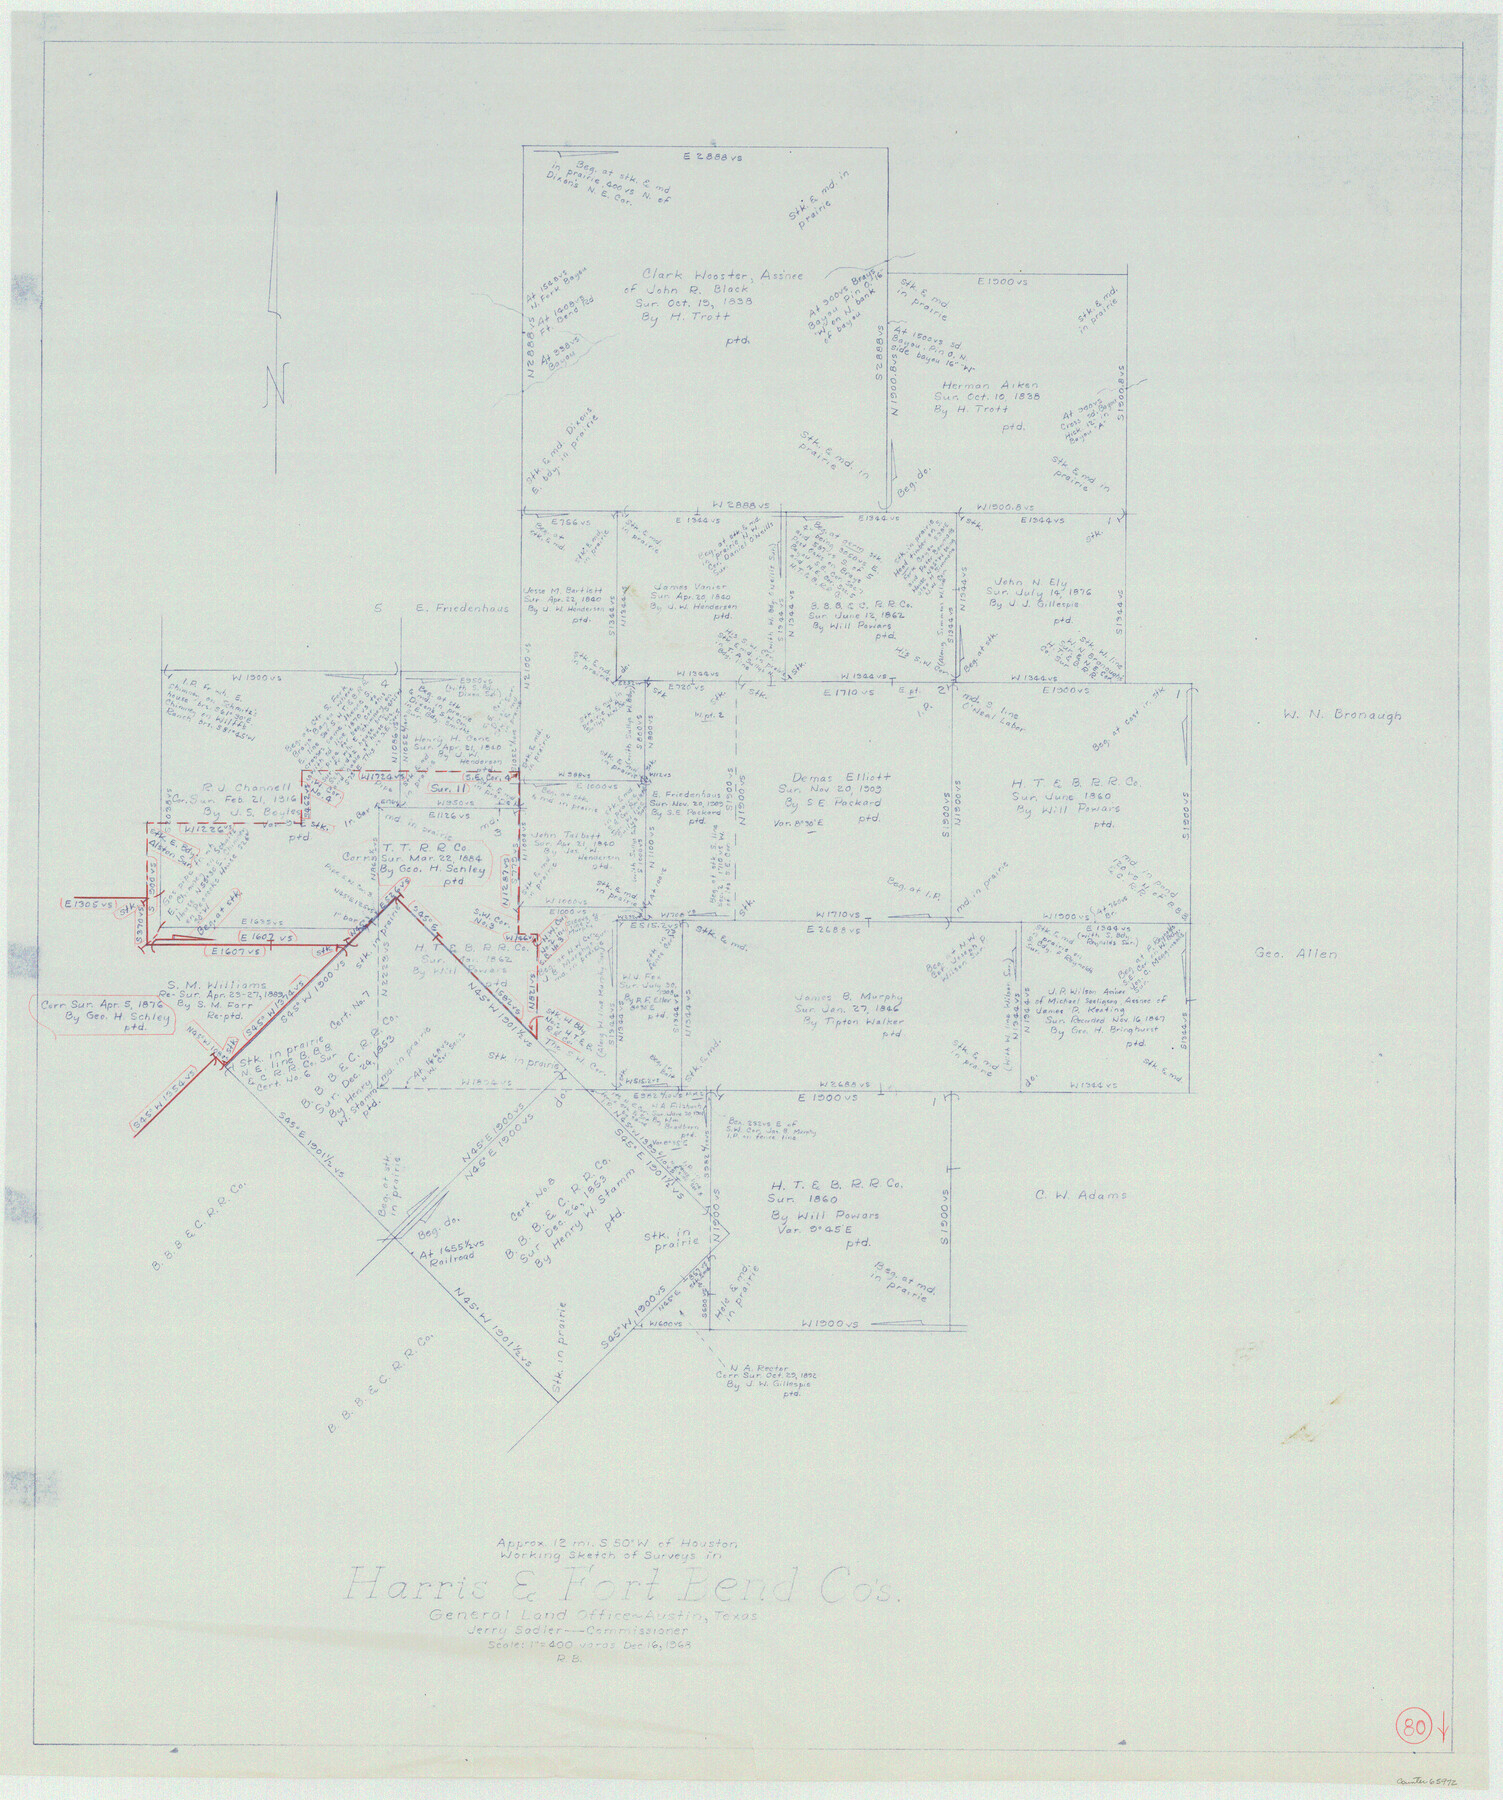 65972, Harris County Working Sketch 80, General Map Collection